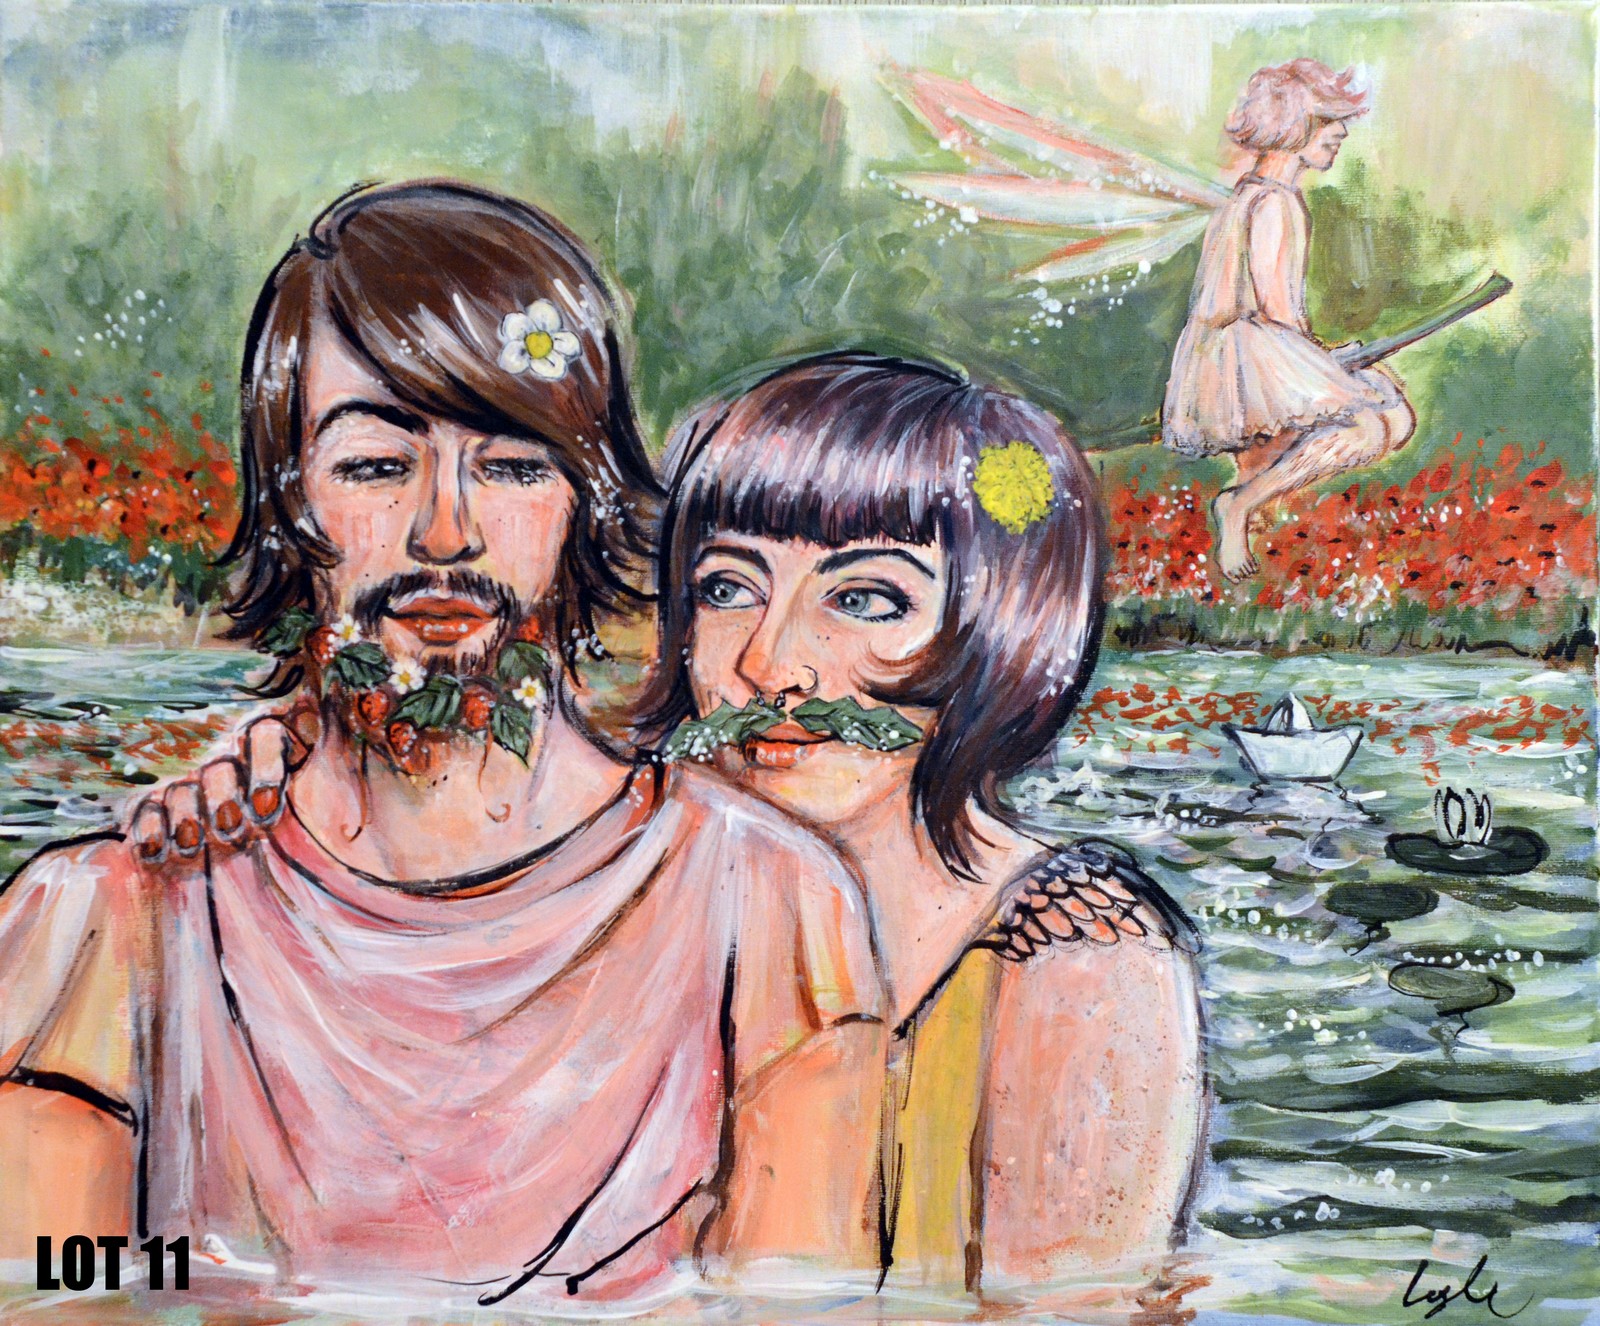 Fairy like creatures bathing in a pond (60x50cm) by Lyle River O’Mara – 2 of 2 lots Acrylic on